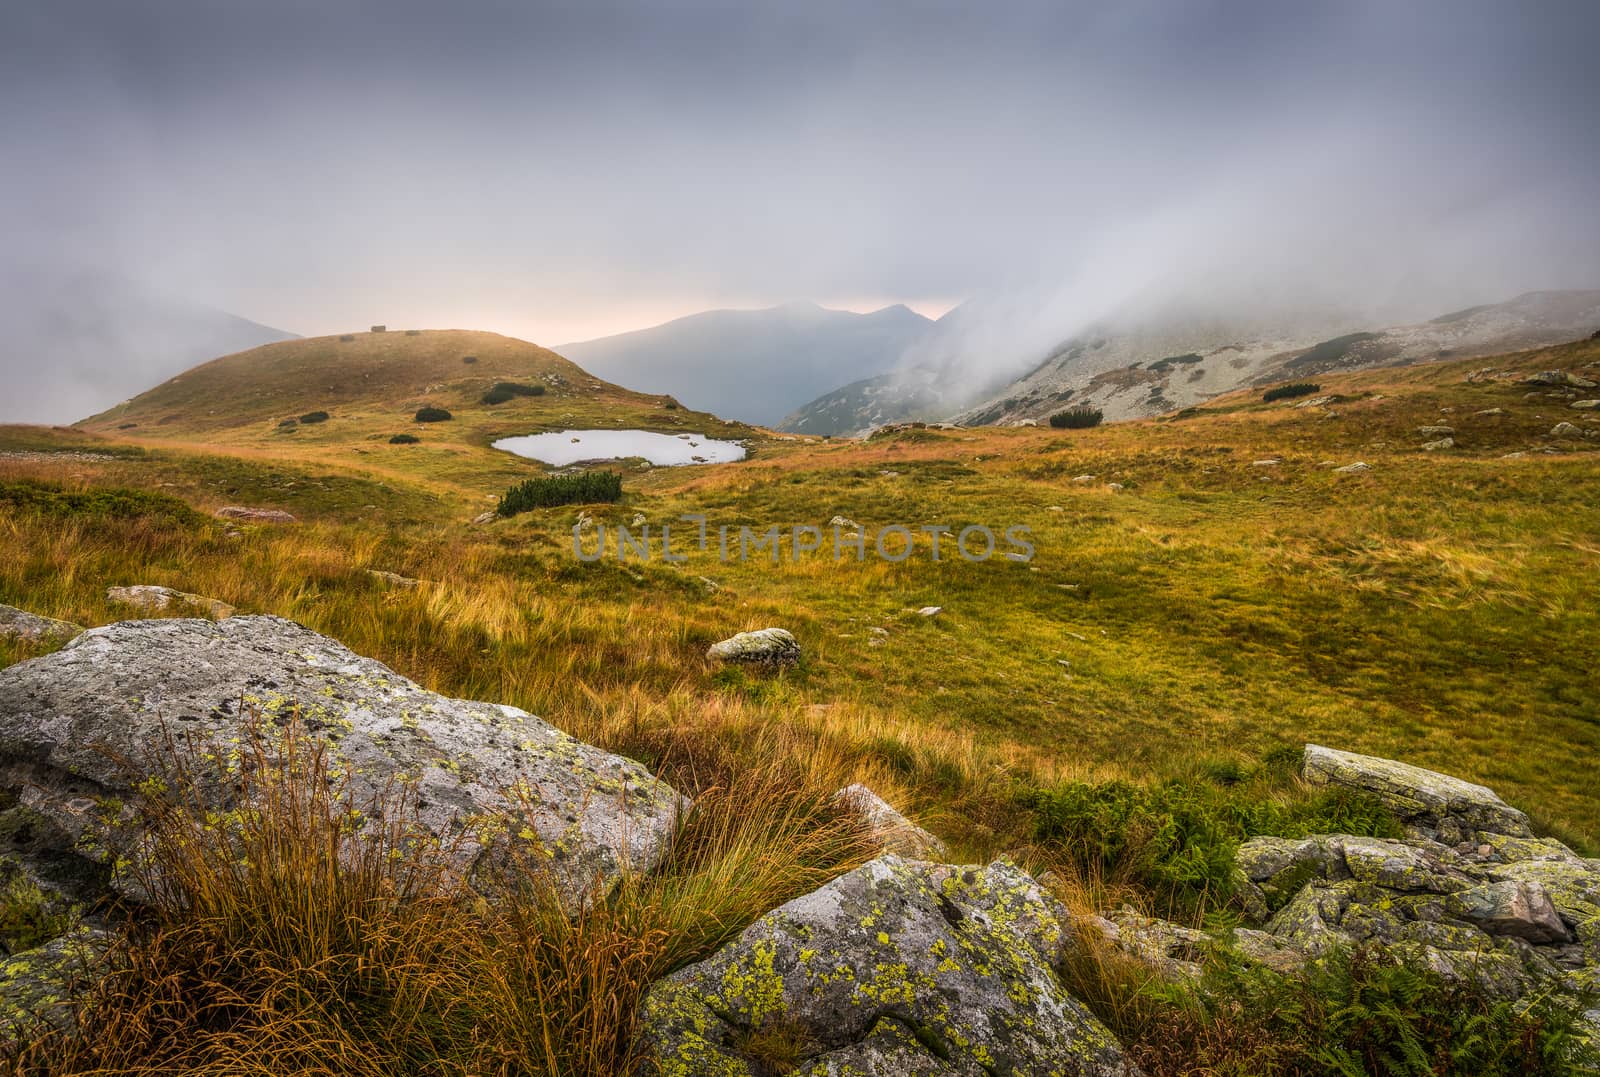 Foggy Mountain Landscape with a Tarn and Rocks in Foreground at Sunset